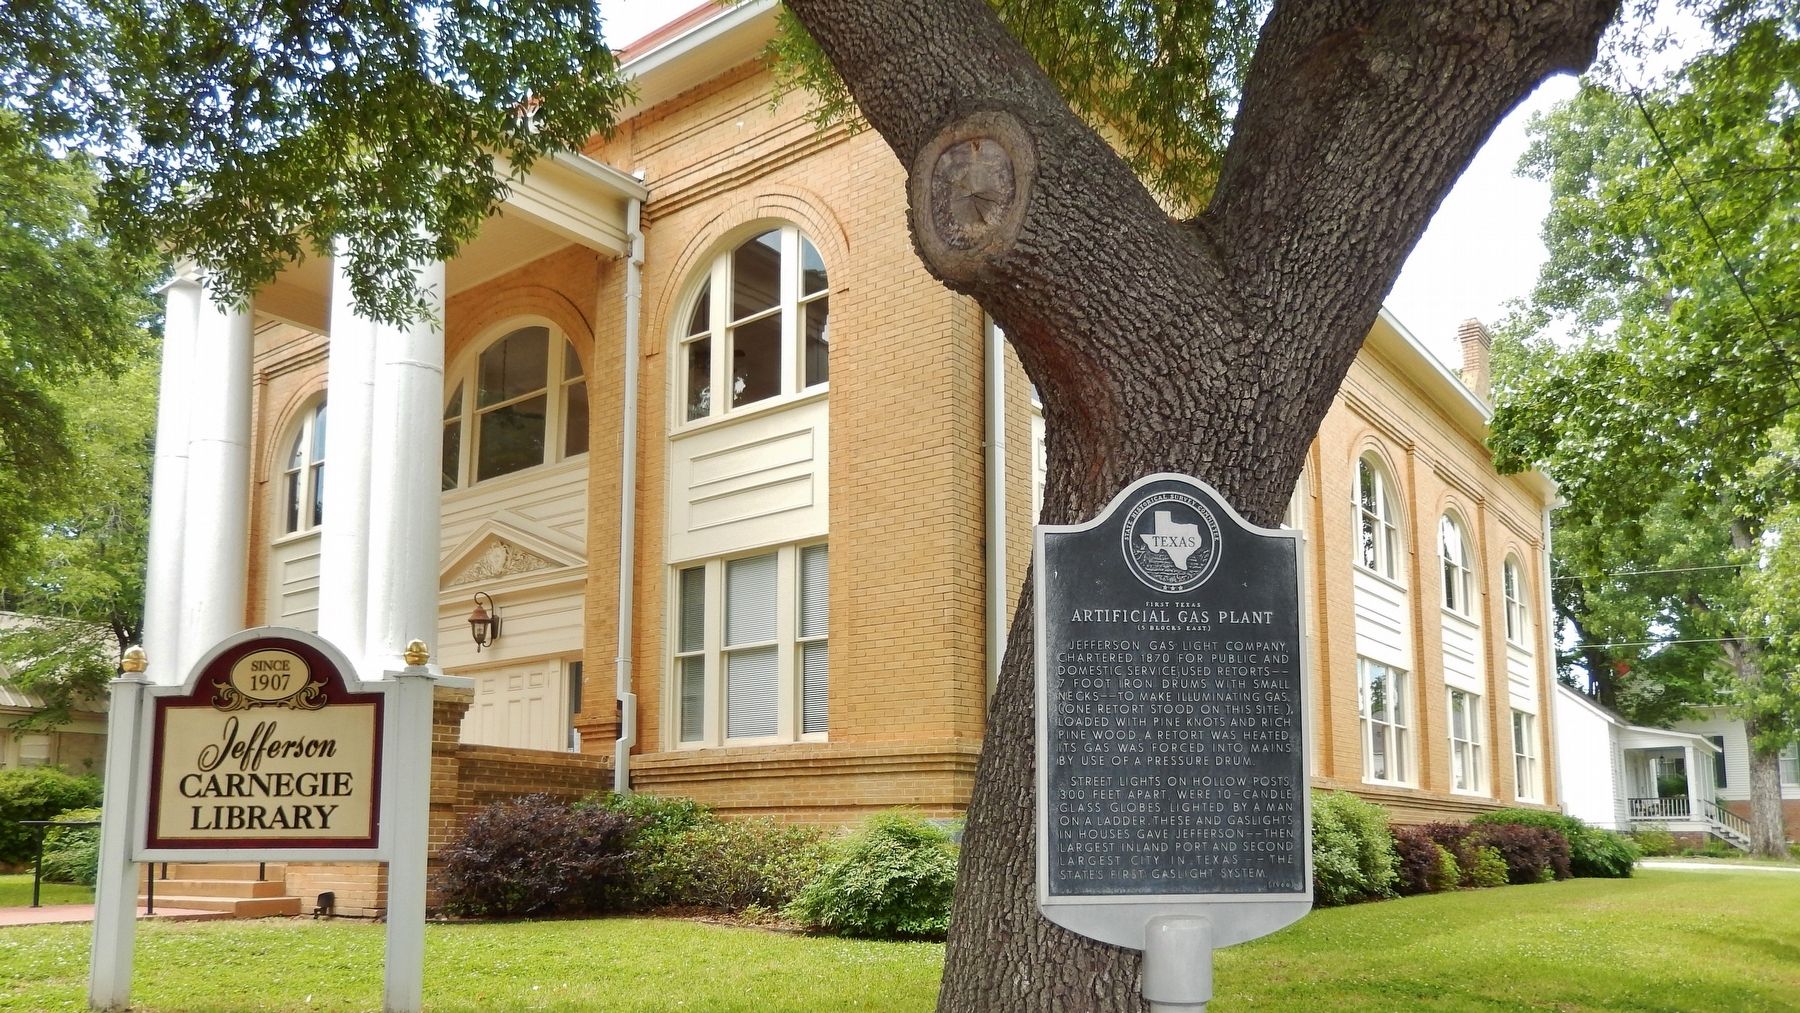 Jefferson Public Library (<i>corner view showing unrelated marker</i>) image. Click for full size.